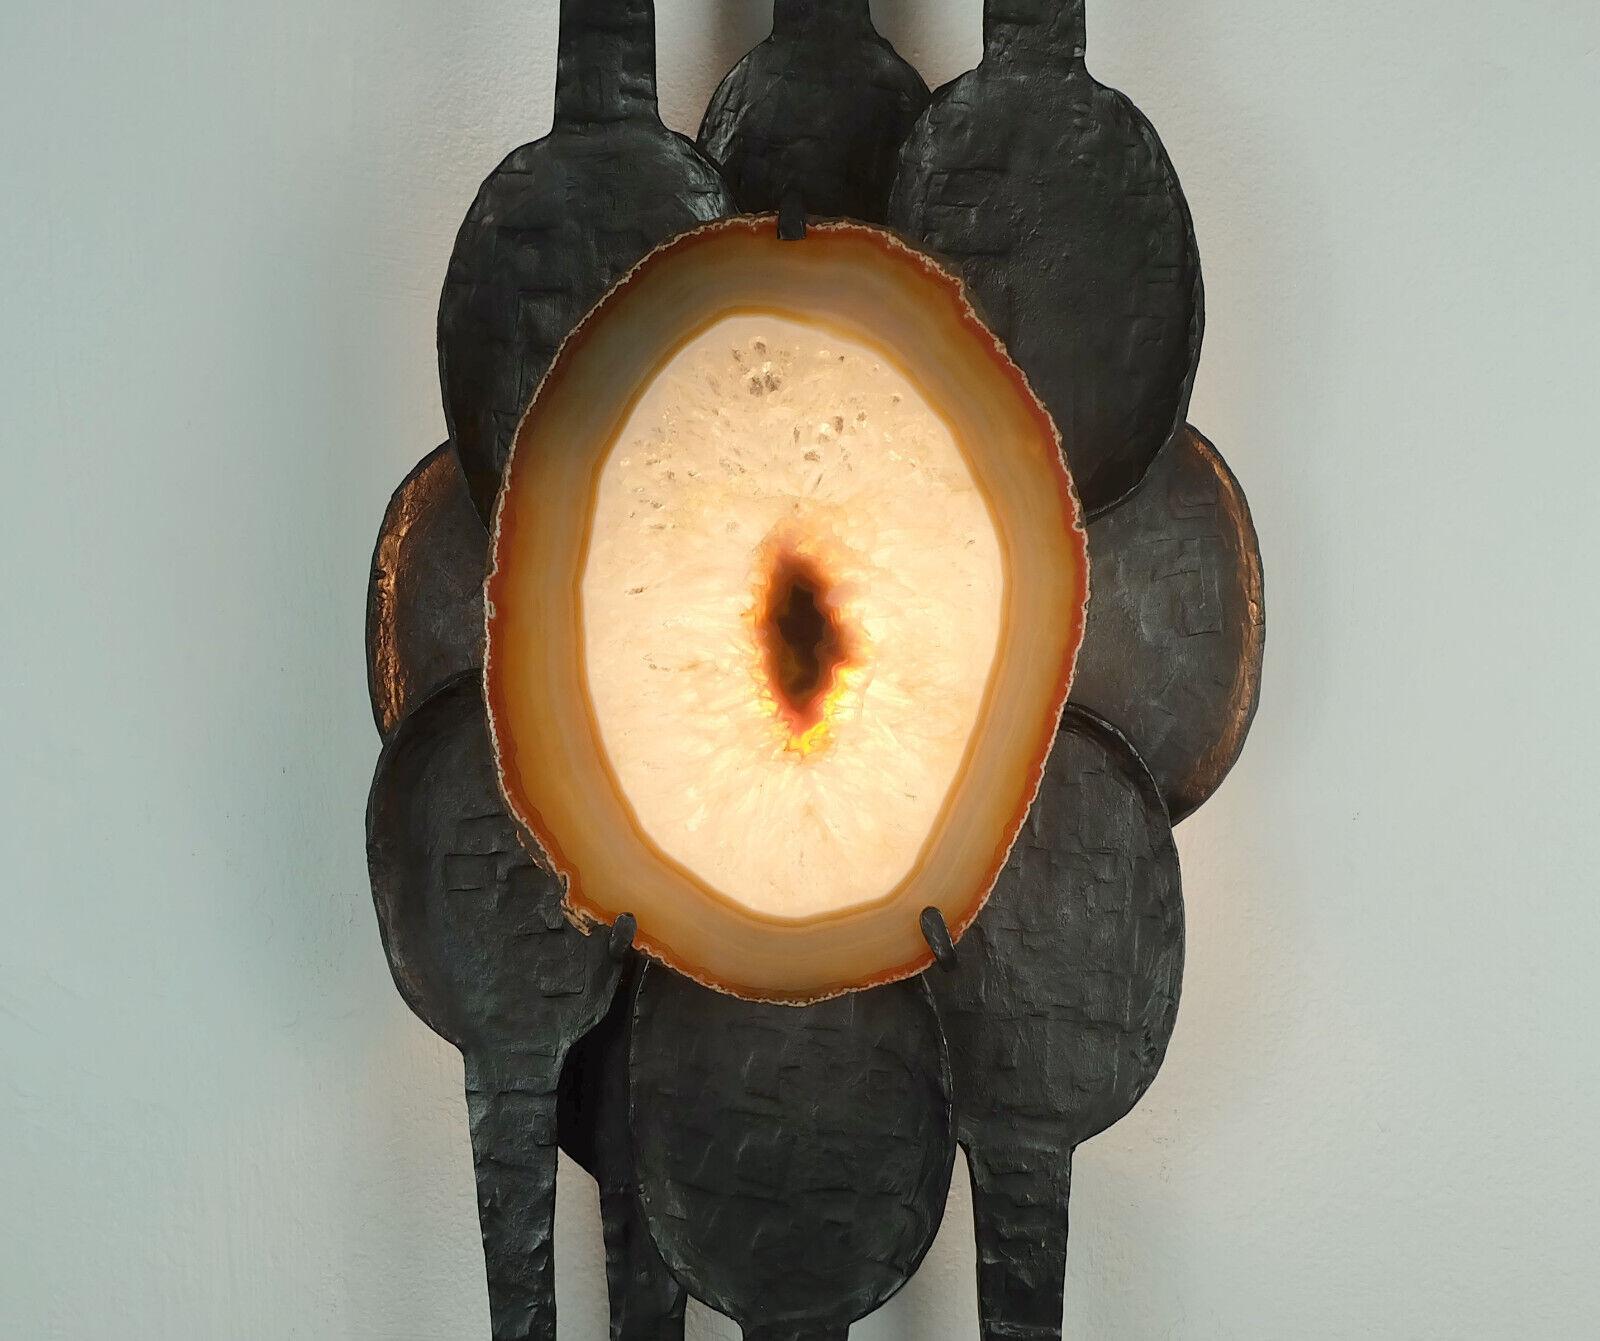 Outstanding large mid-century brutalist style wall sconce made of wrought iron and agate. With a drawbar switch on the lamp, covered by one of the iron elements. Holds one E14 socket. Wiring for international use.

Dimensions in cm:
Length 82 cm,